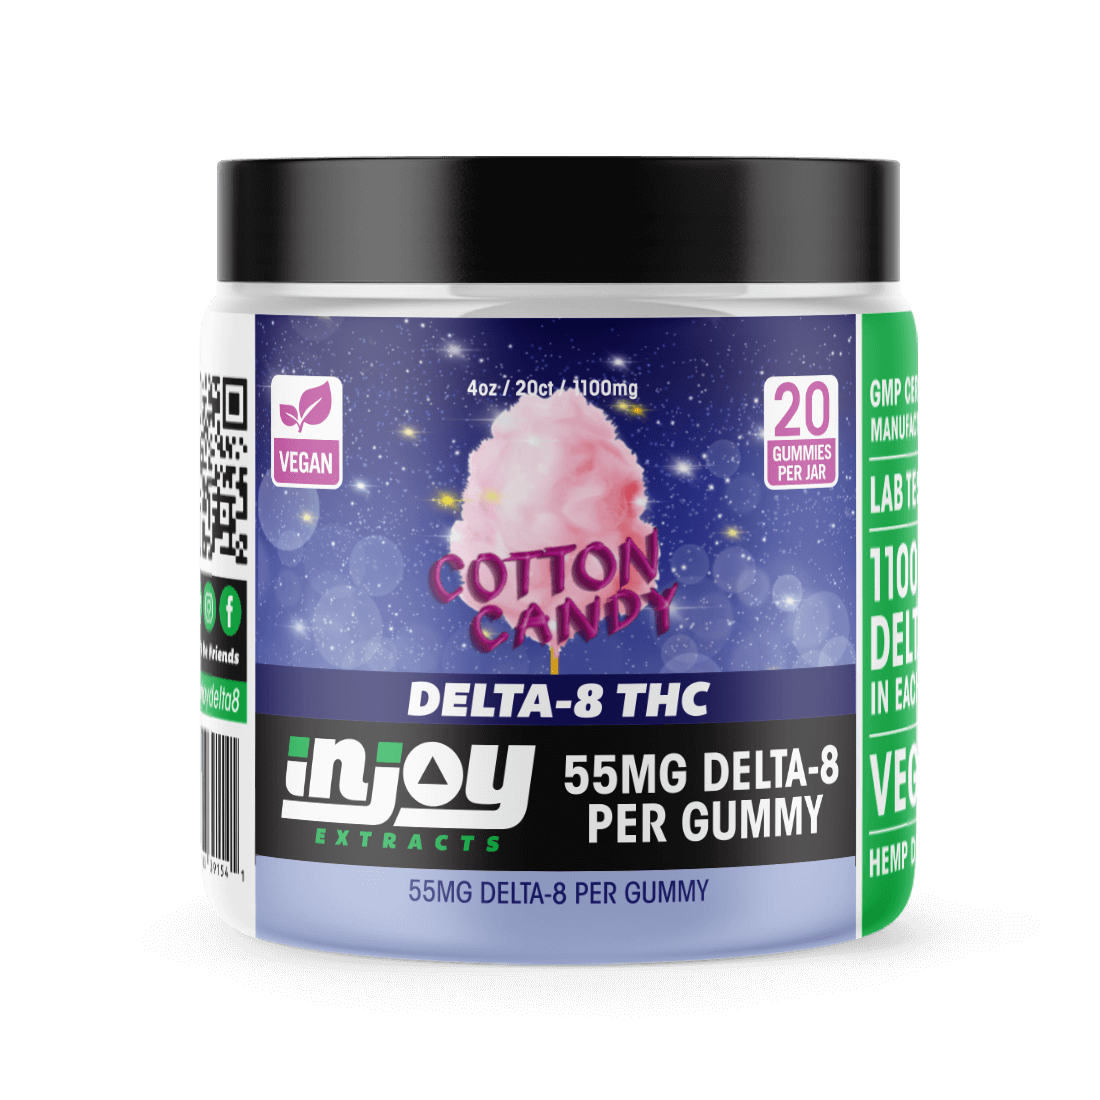 50mg Delta 8 Gummies - Cotton Candy Flavored - Injoy Extracts